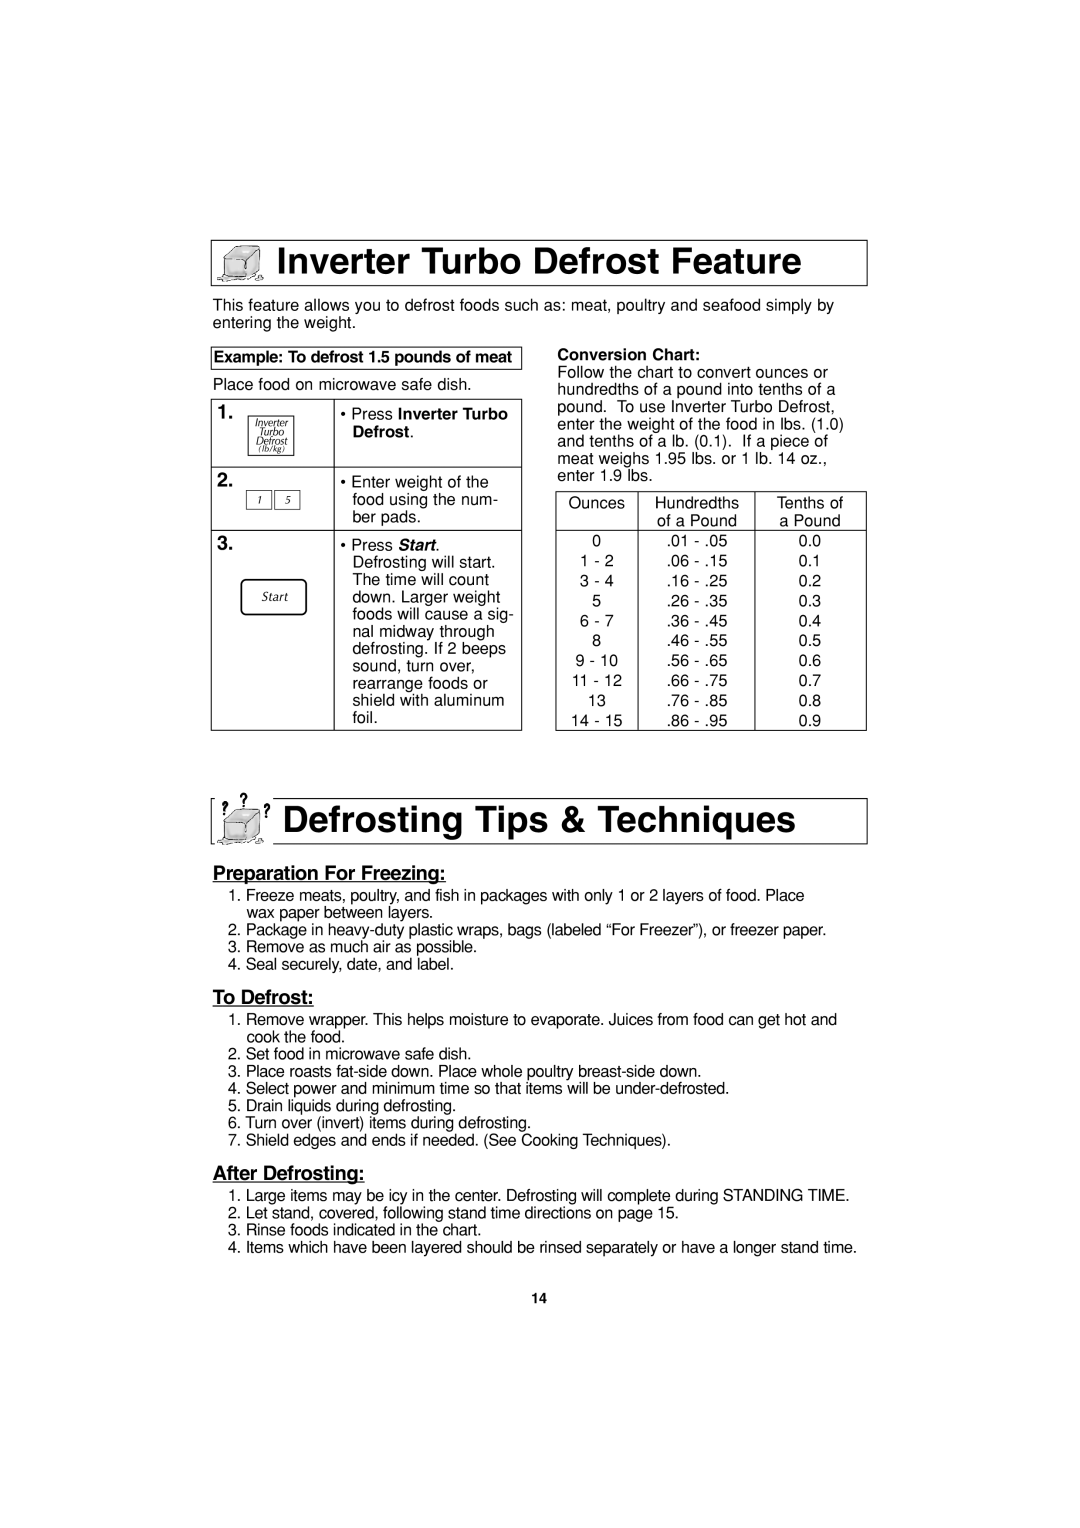 Panasonic NN-S943 Inverter Turbo Defrost Feature, Defrosting Tips & Techniques, Preparation For Freezing, To Defrost 